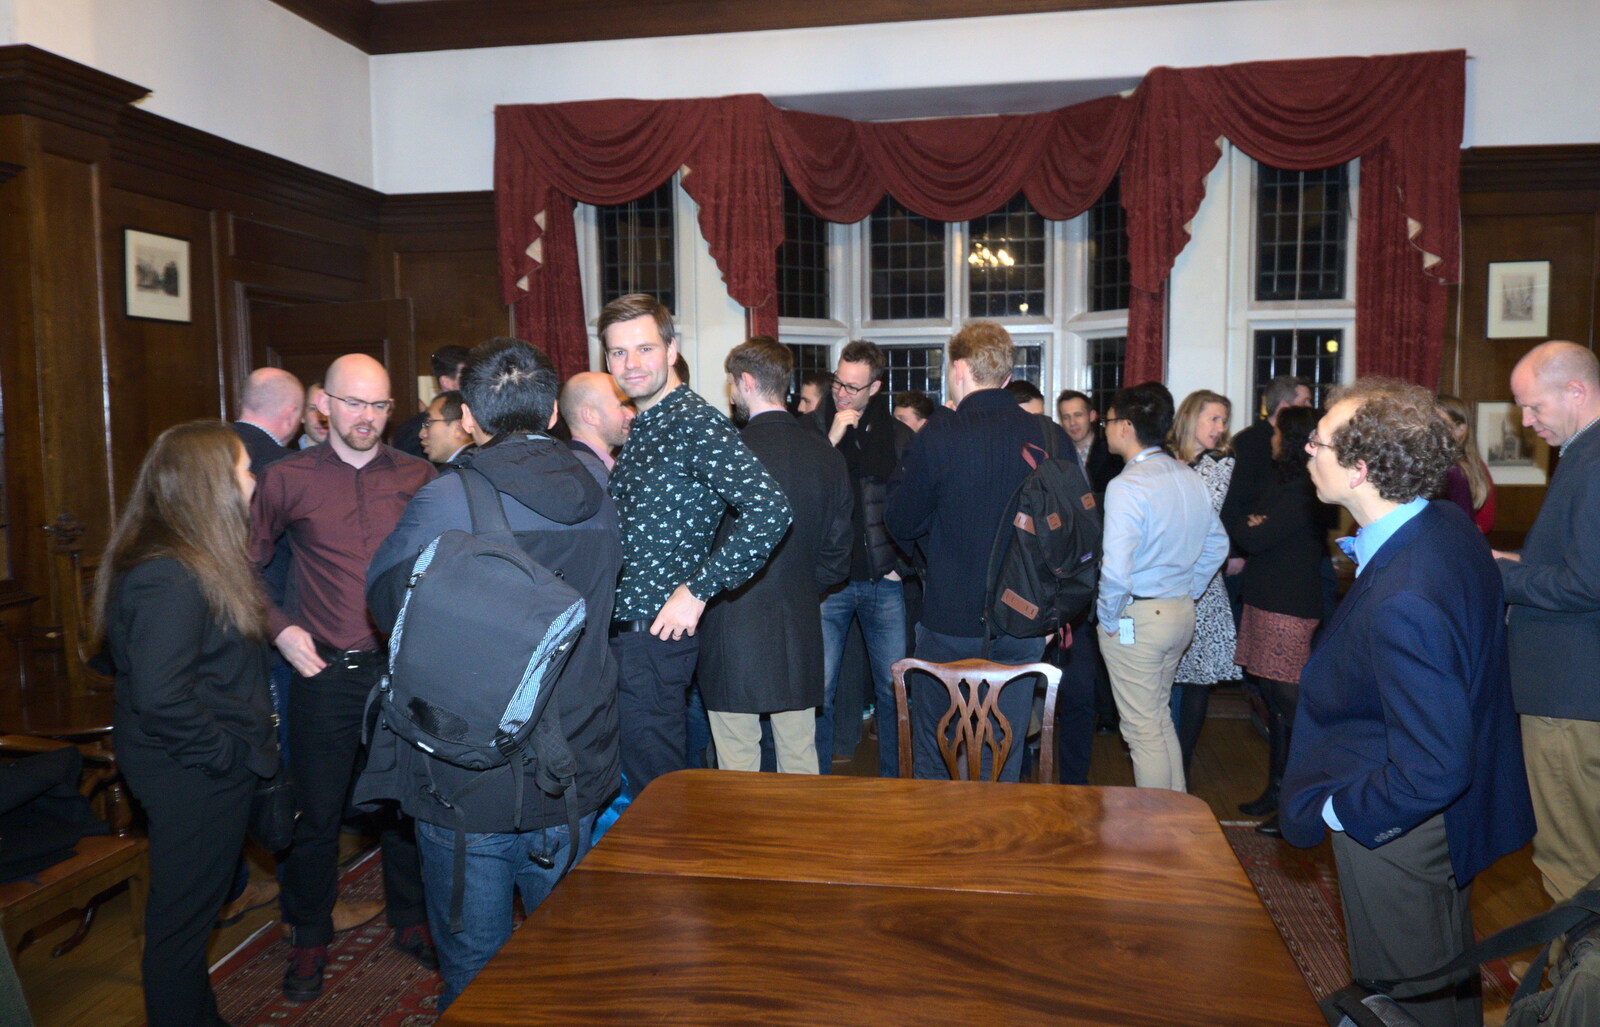 Past and present SwiftKeyers fill the room from SwiftKey's Ten Year Anniversary Reunion, Selwyn College, Cambridge - 11th January 2019